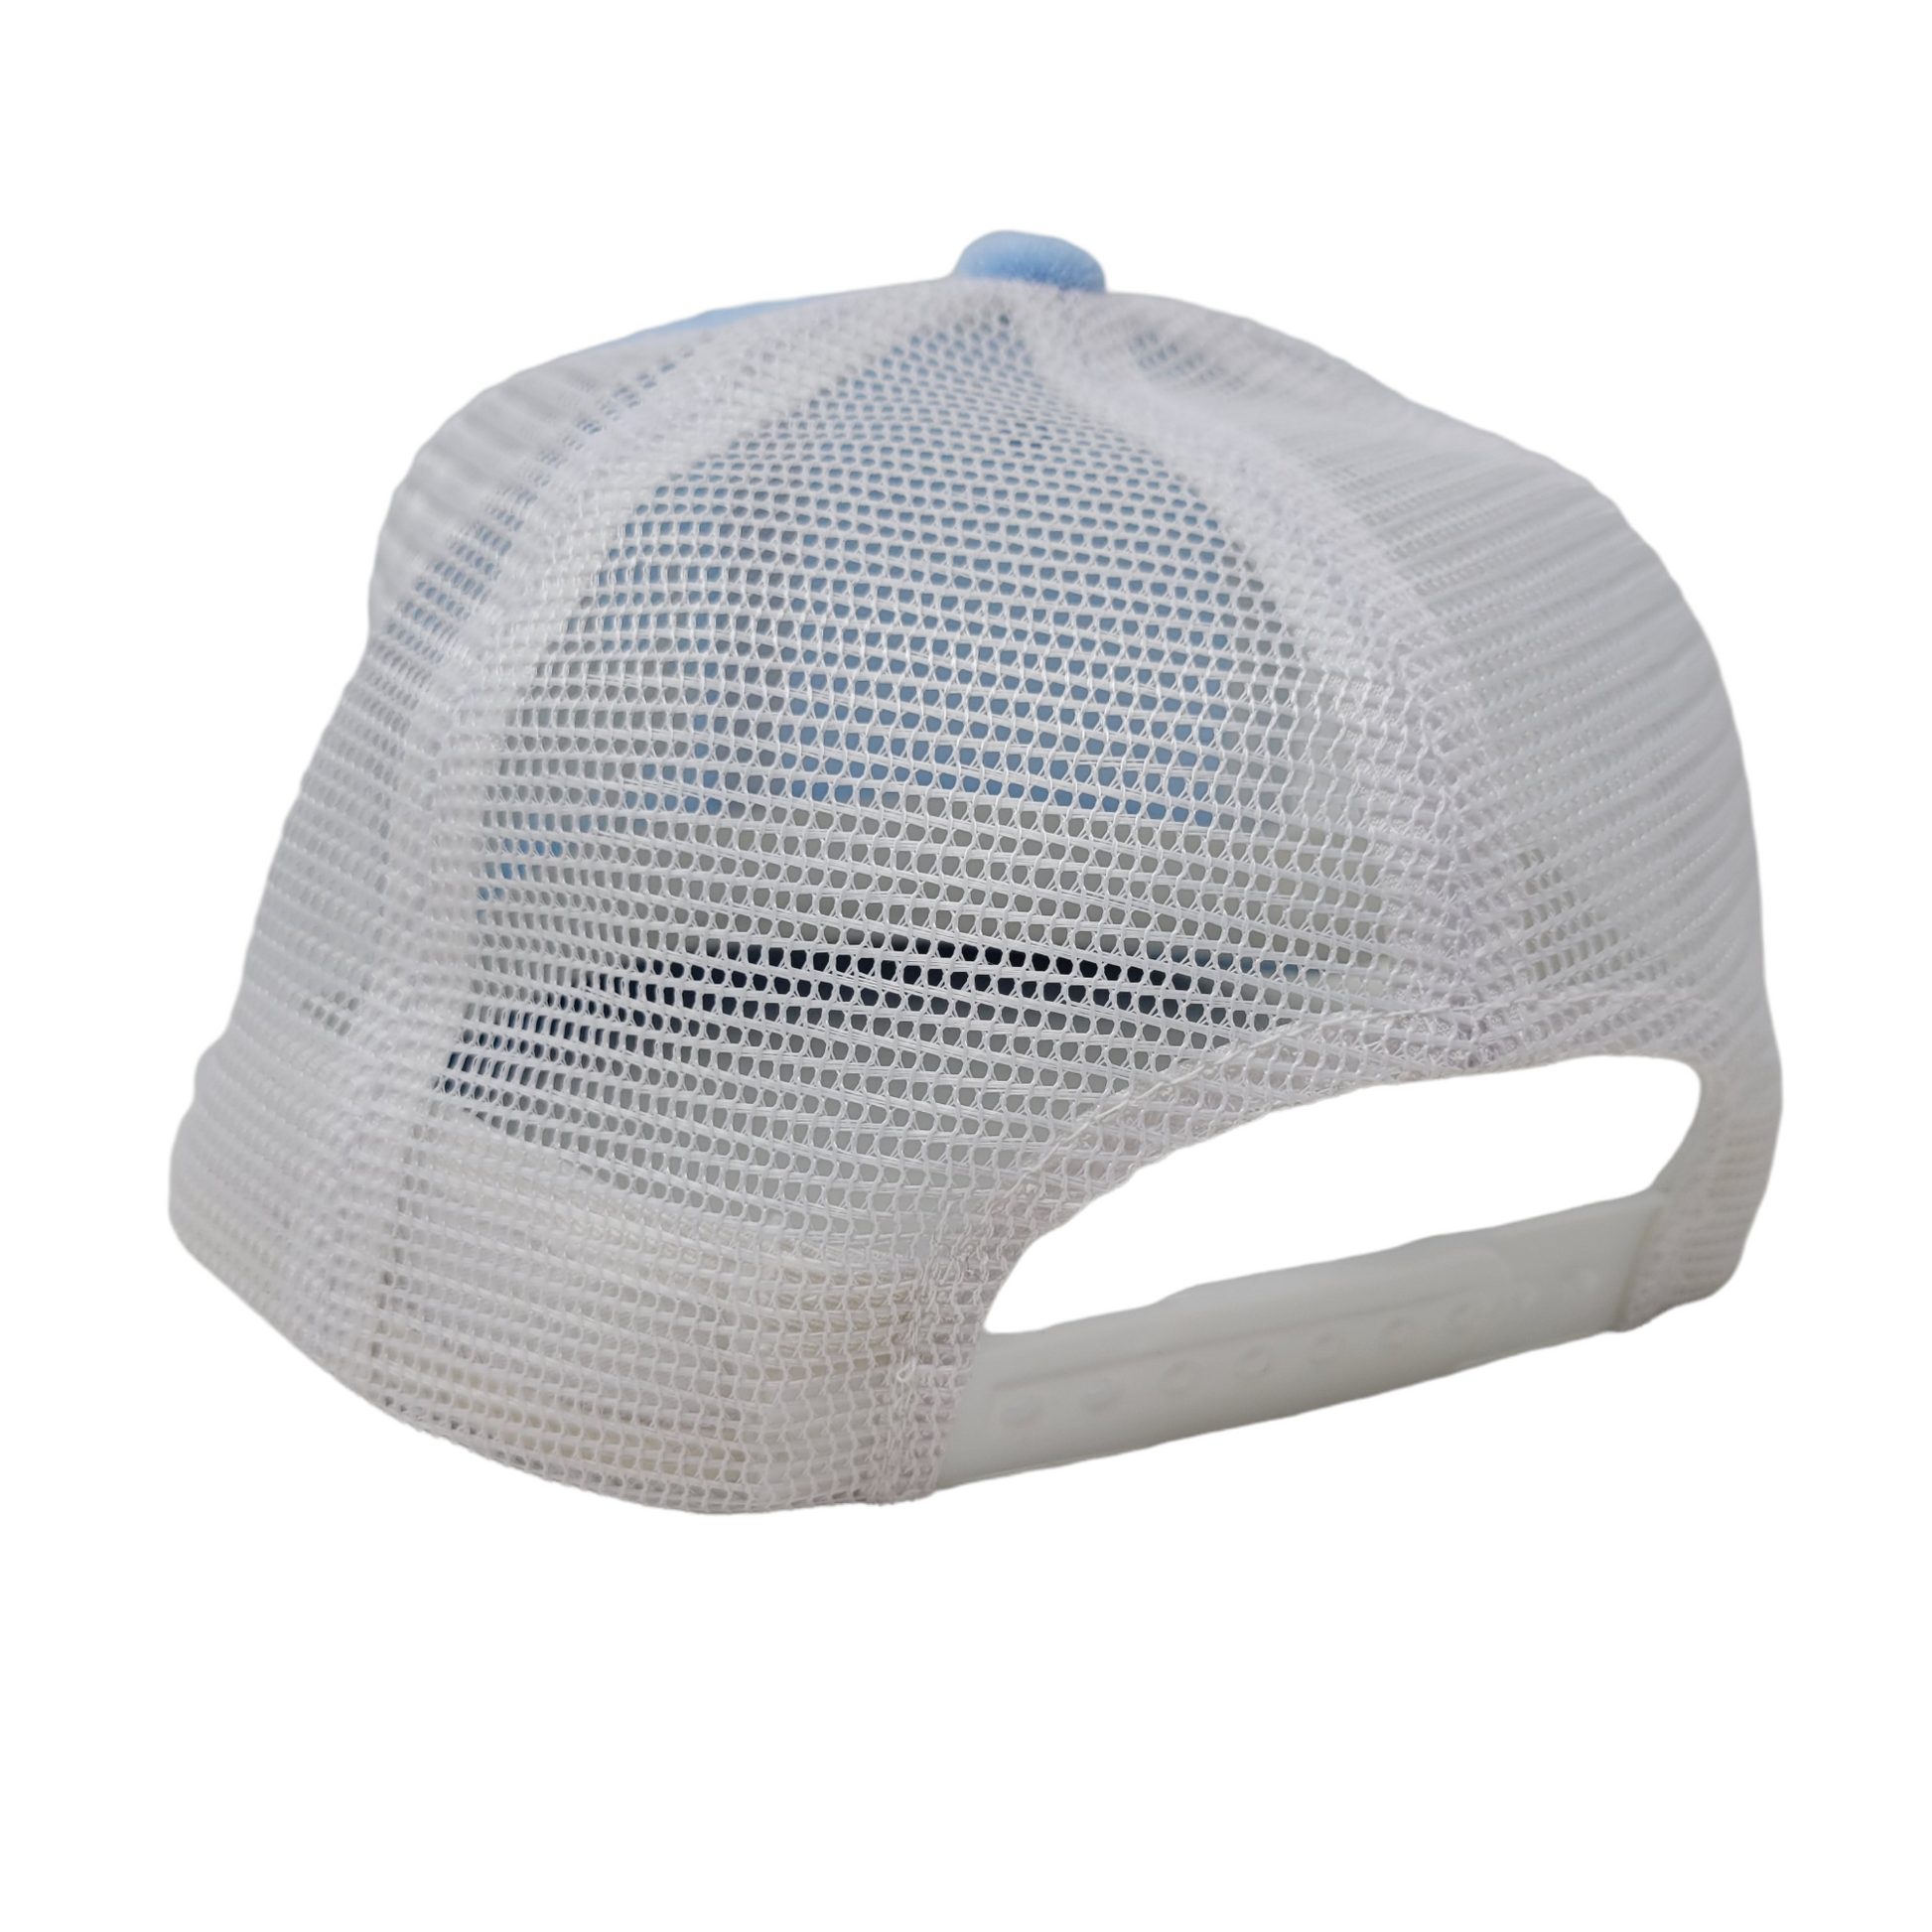 THE BABY BLUE TERRY CLOTH / WHITE MESH TAG LOGO SNAPBACK HAT - Panic 39